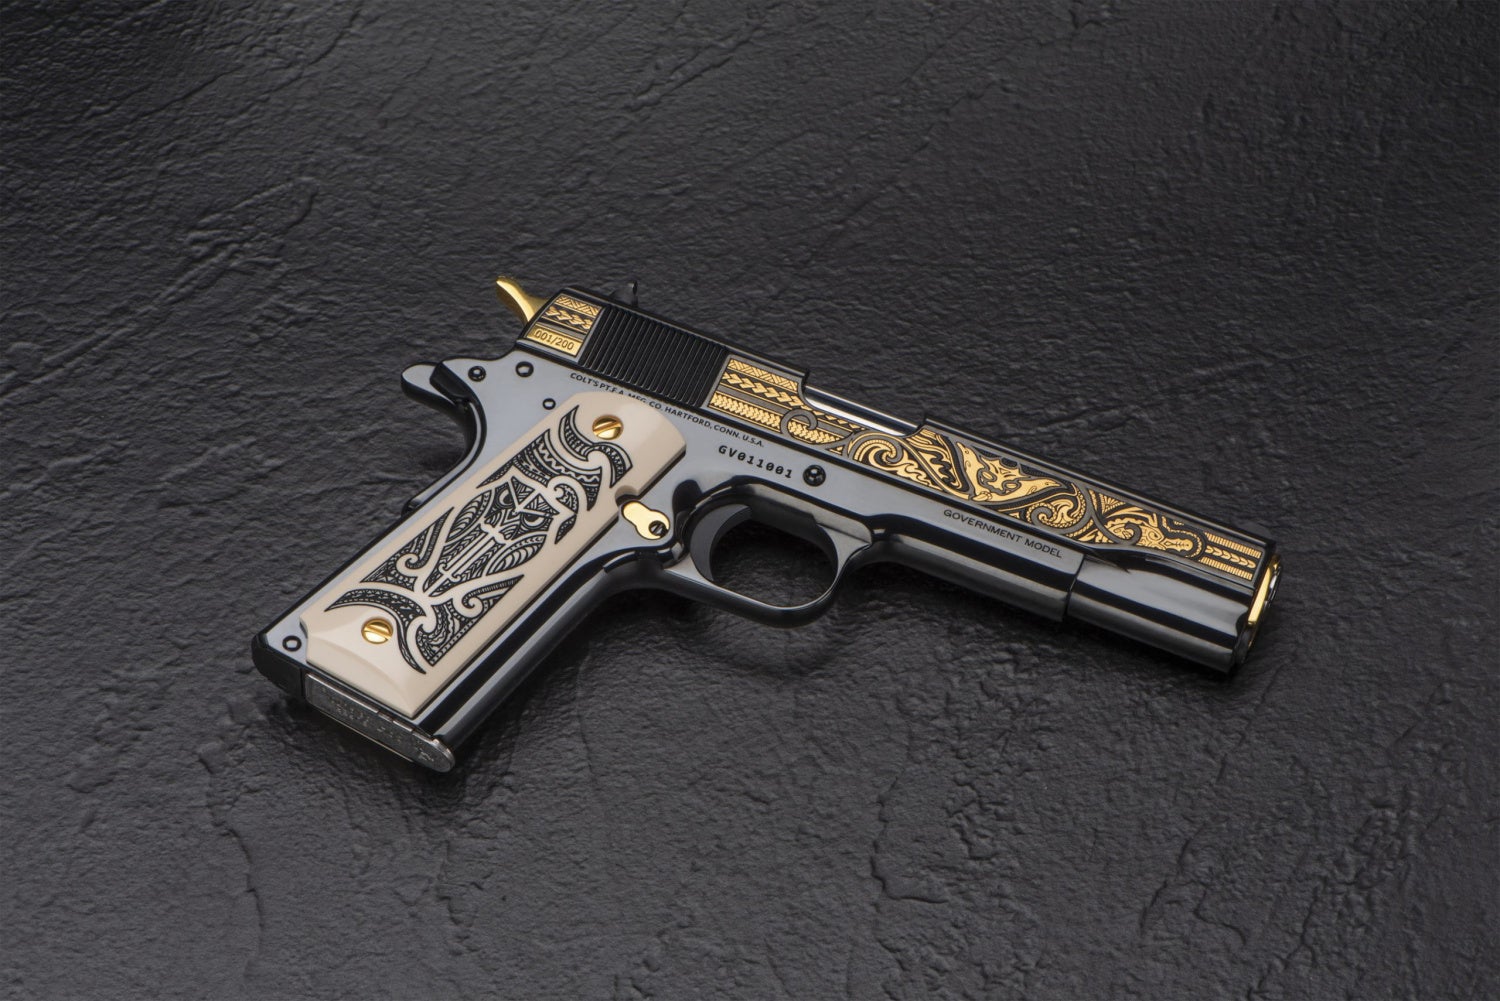 Introducing The Mana Collectors 1911 from SK Customs